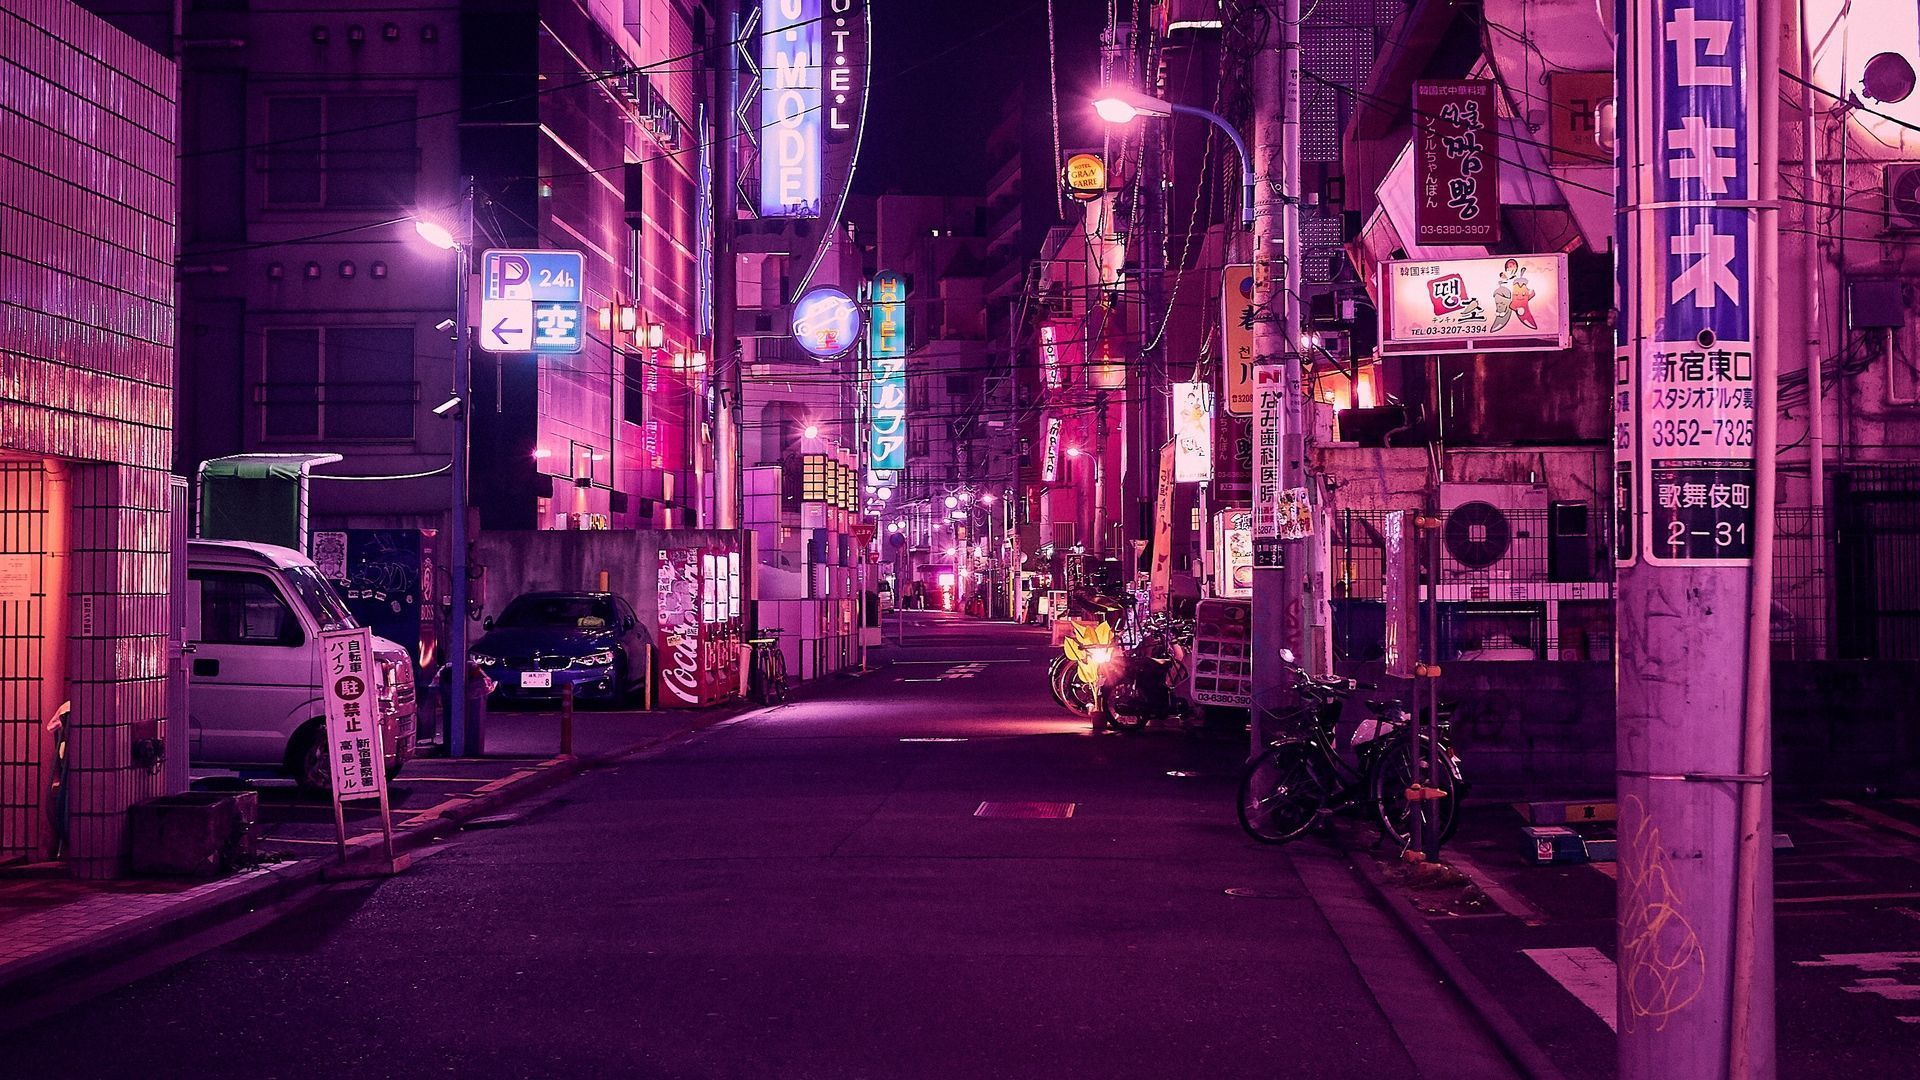 A street at night with a purple hue - Tokyo